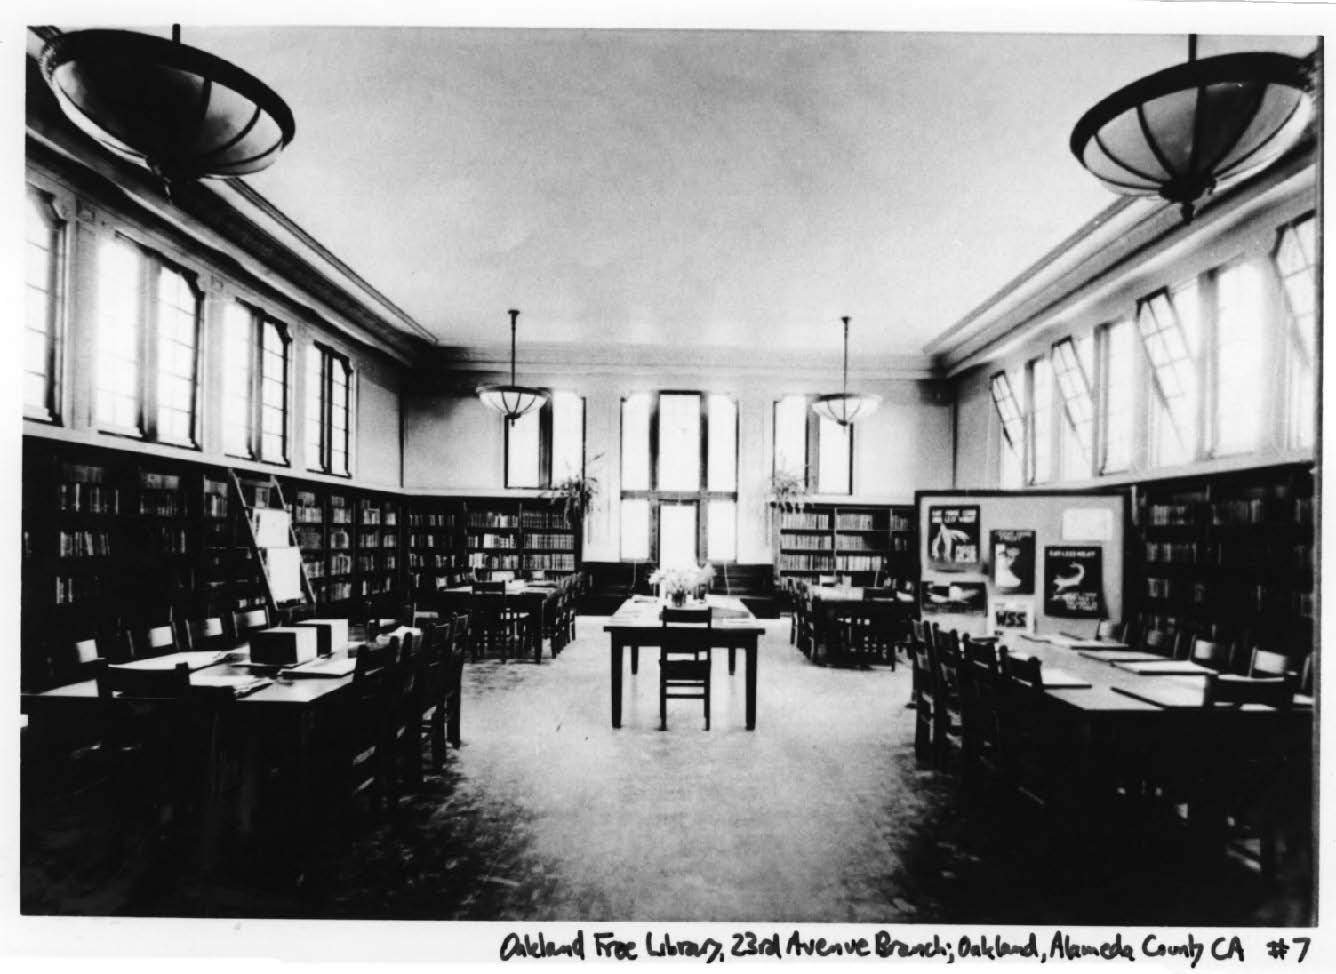 The interior of the Miller Avenue library. National Park Service photo.